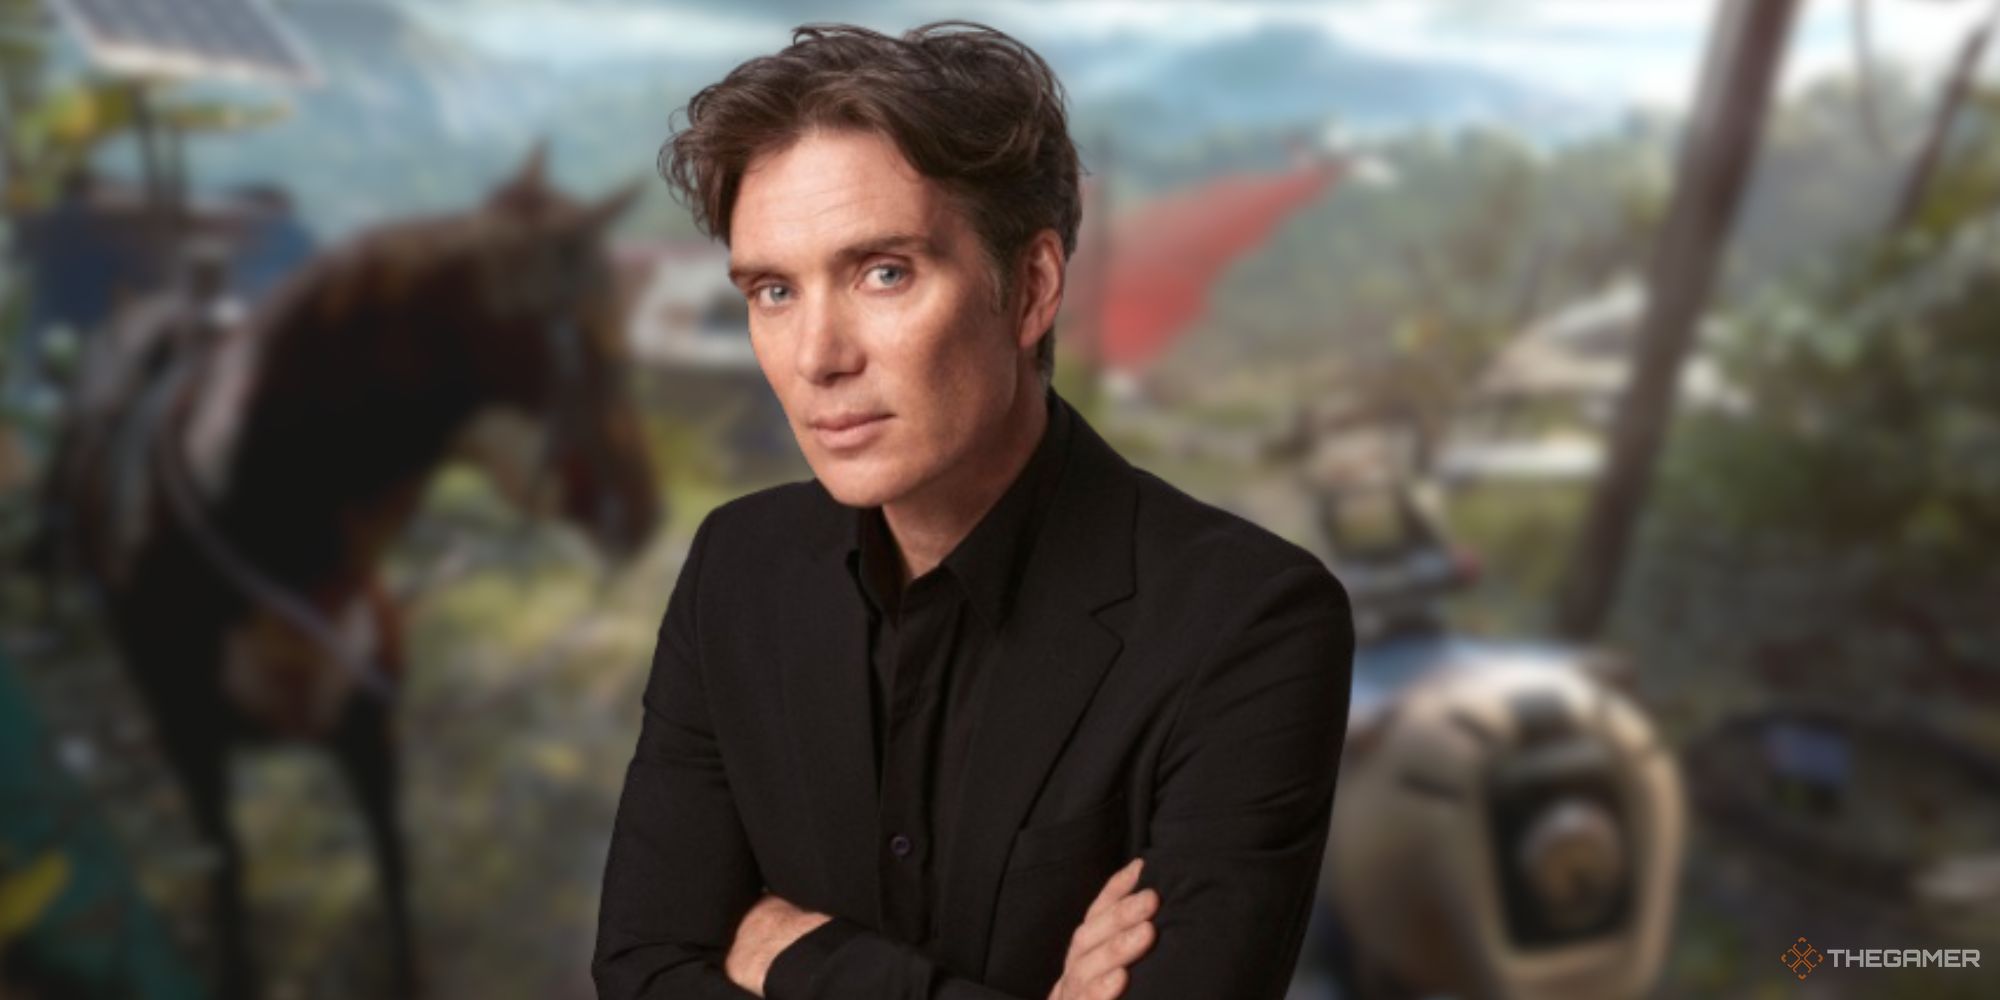 Cillian Murphy with Far Cry 6 in the background